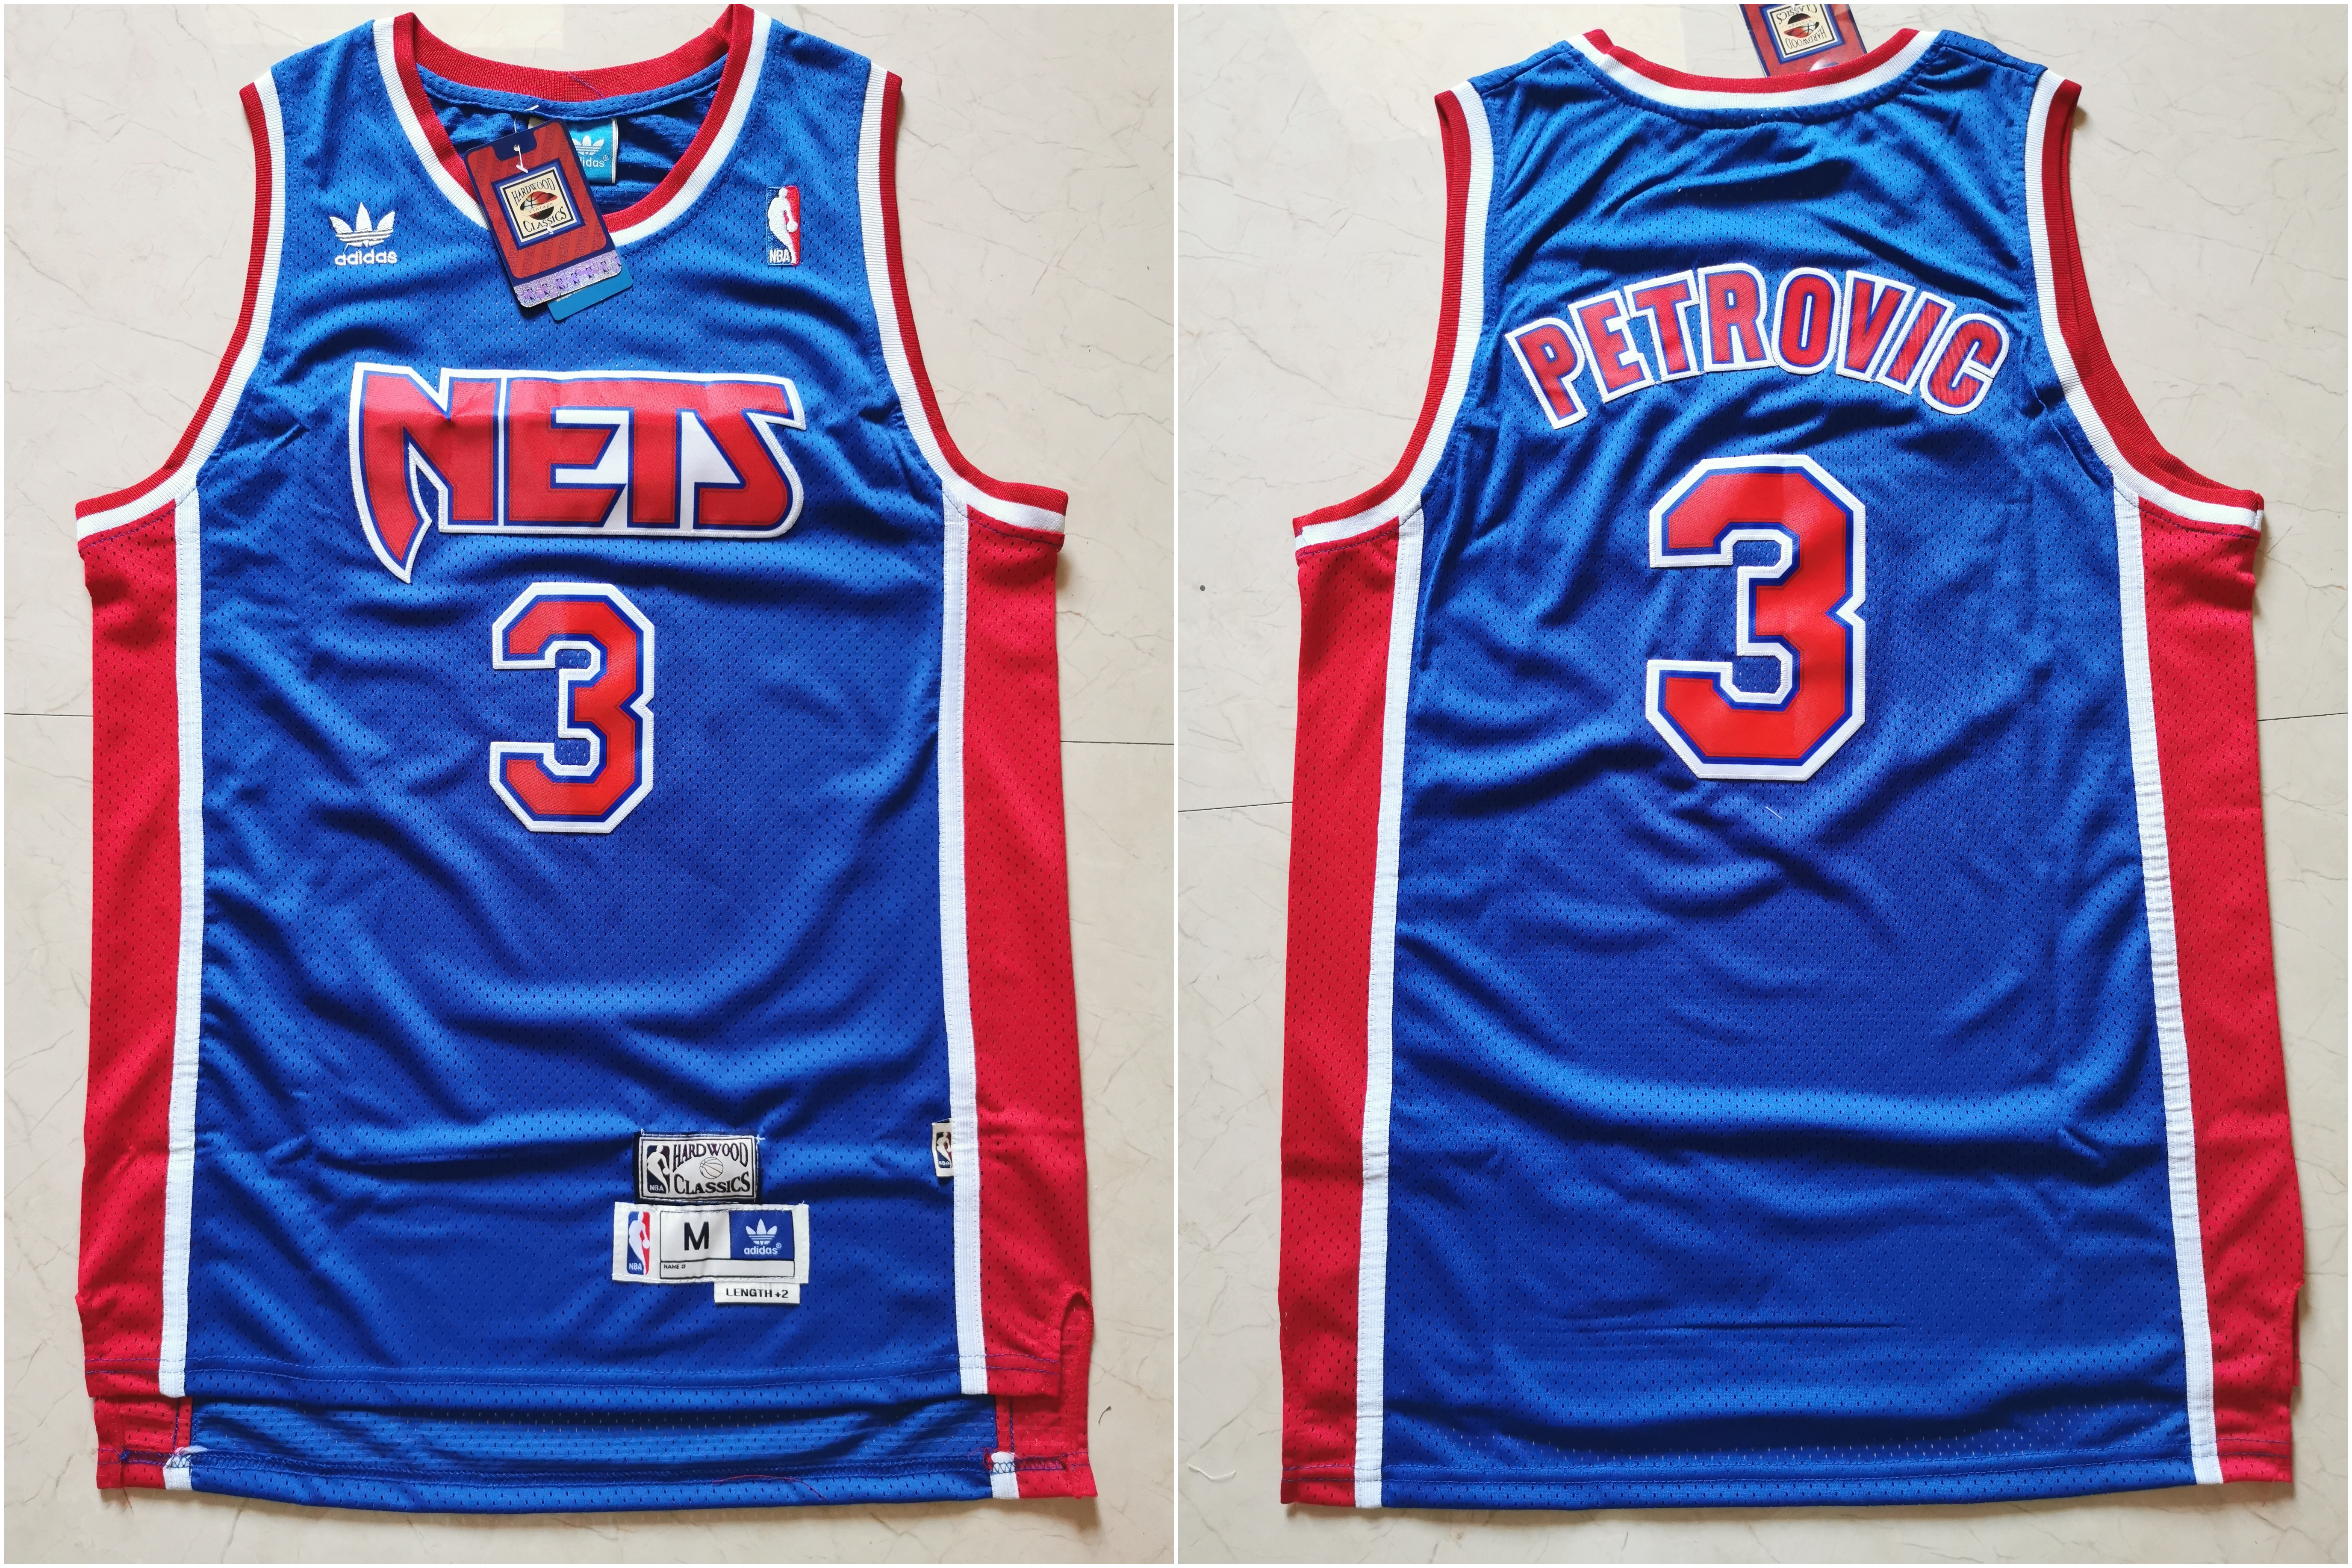 drazen petrovic jersey for sale